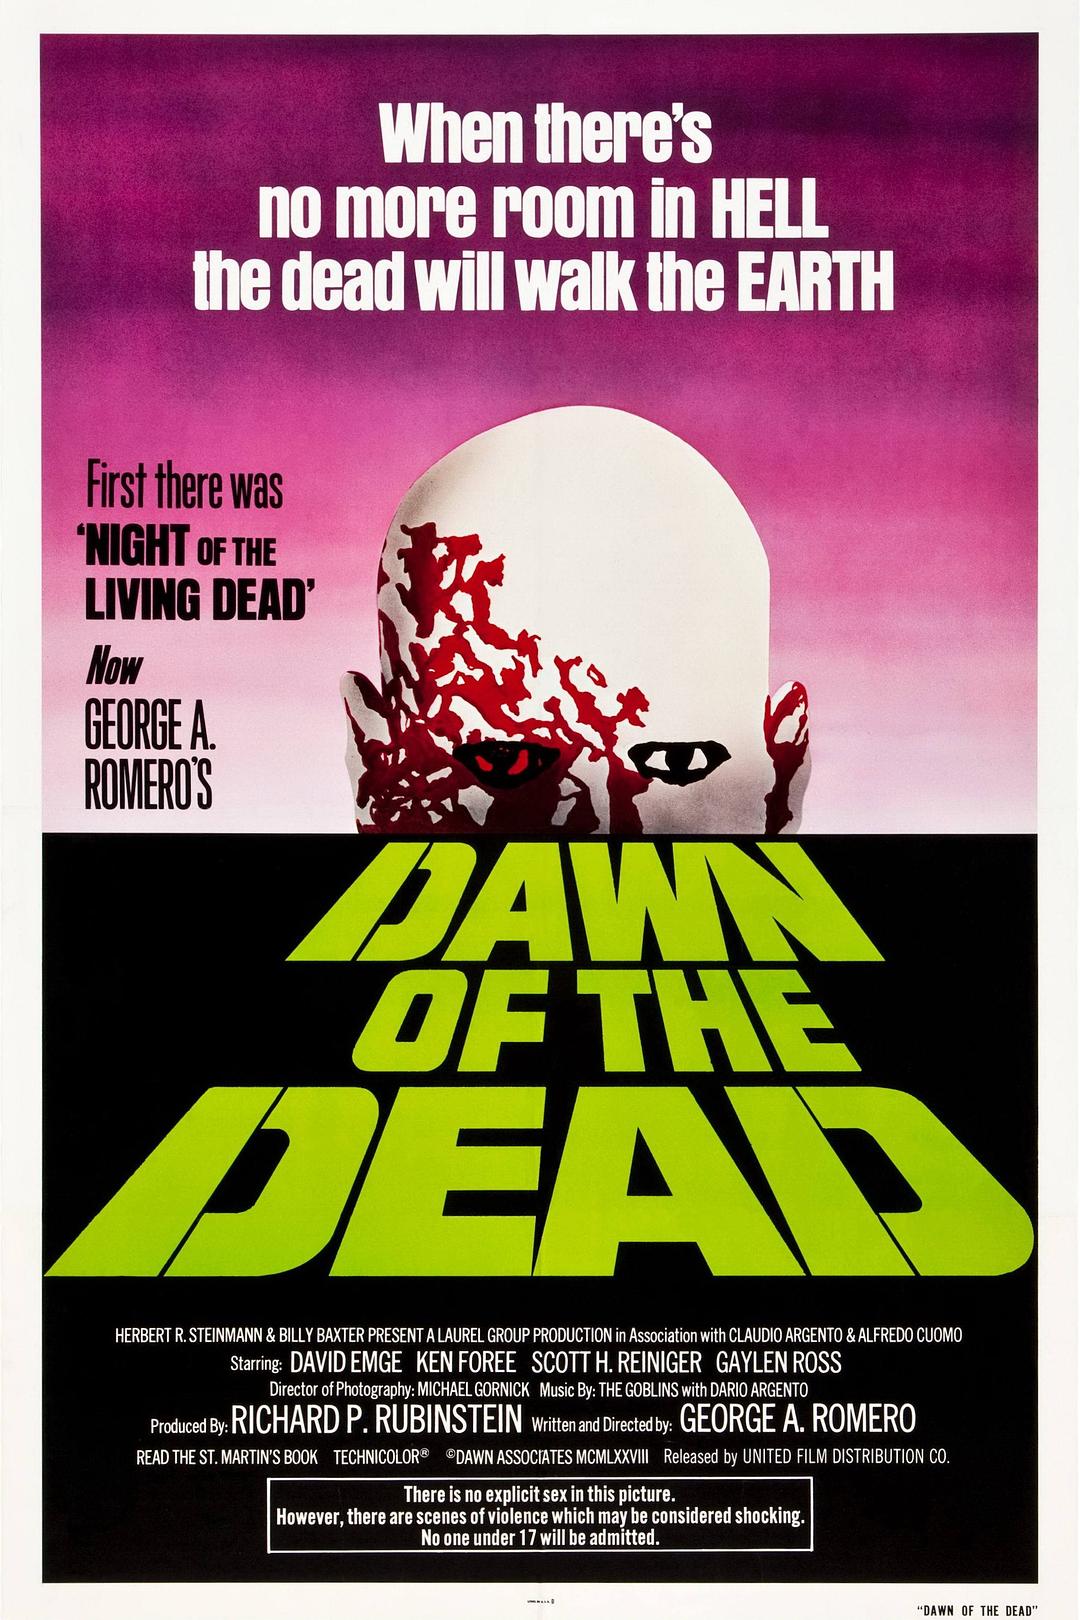  Dawn.Of.The.Dead.1978.EXTENDED.REMASTERED.1080p.BluRay.x264-CREEPSHOW 12.0-1.png